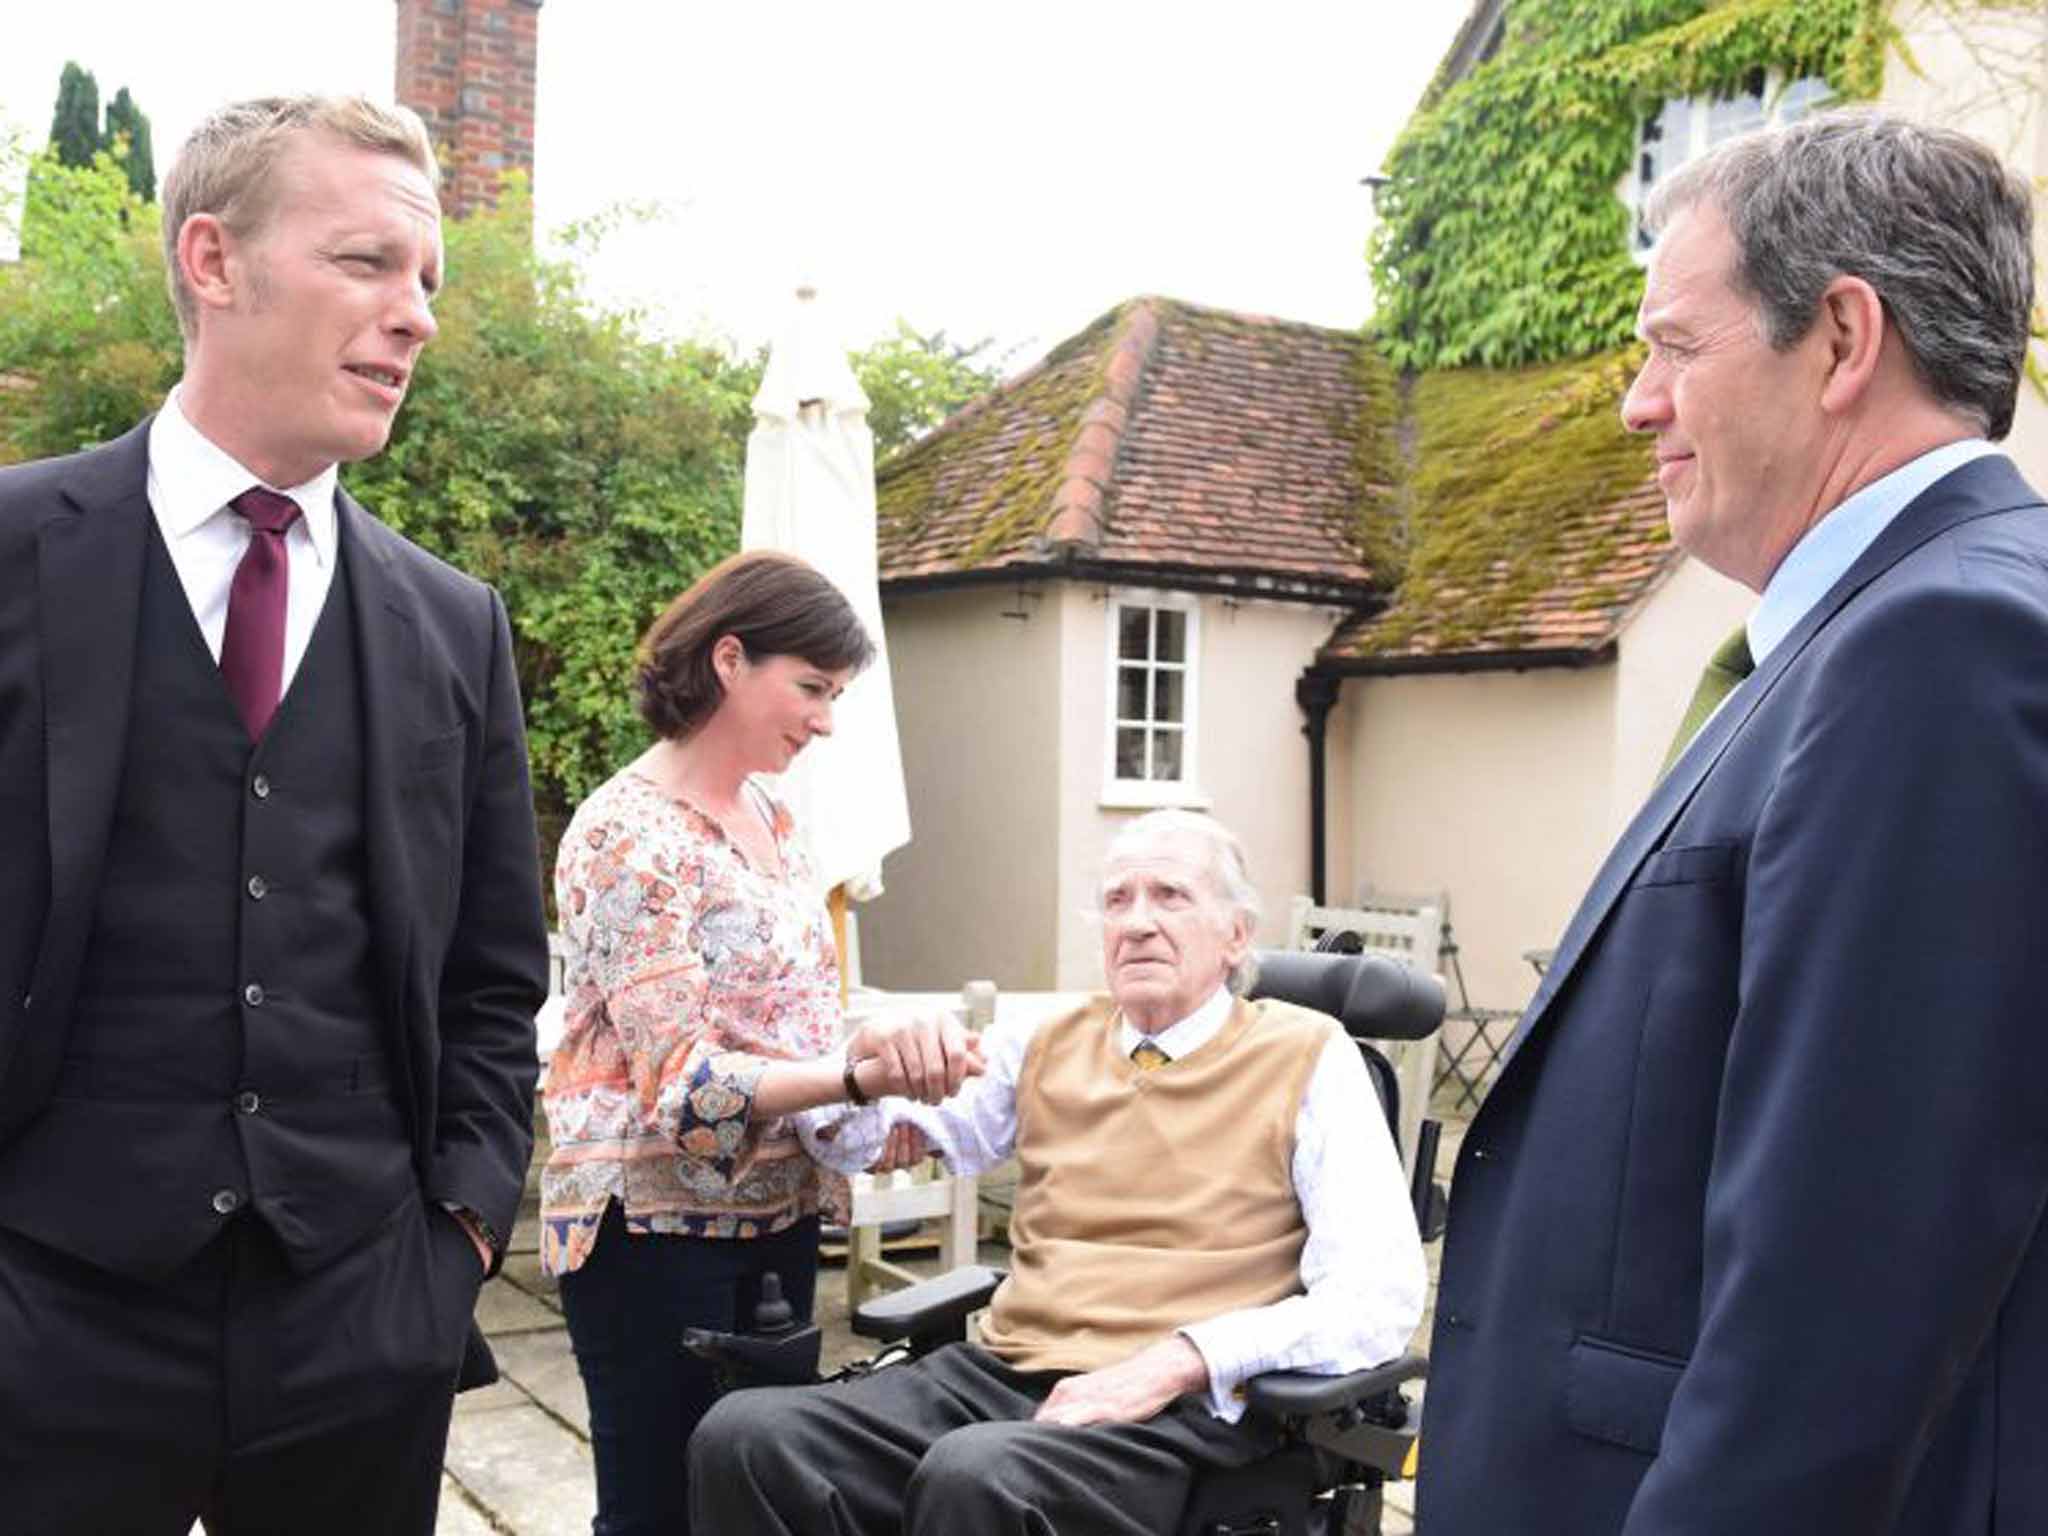 Laurence Fox, Mali Harries, David Warner and Kevin Whately in 'Lewis'